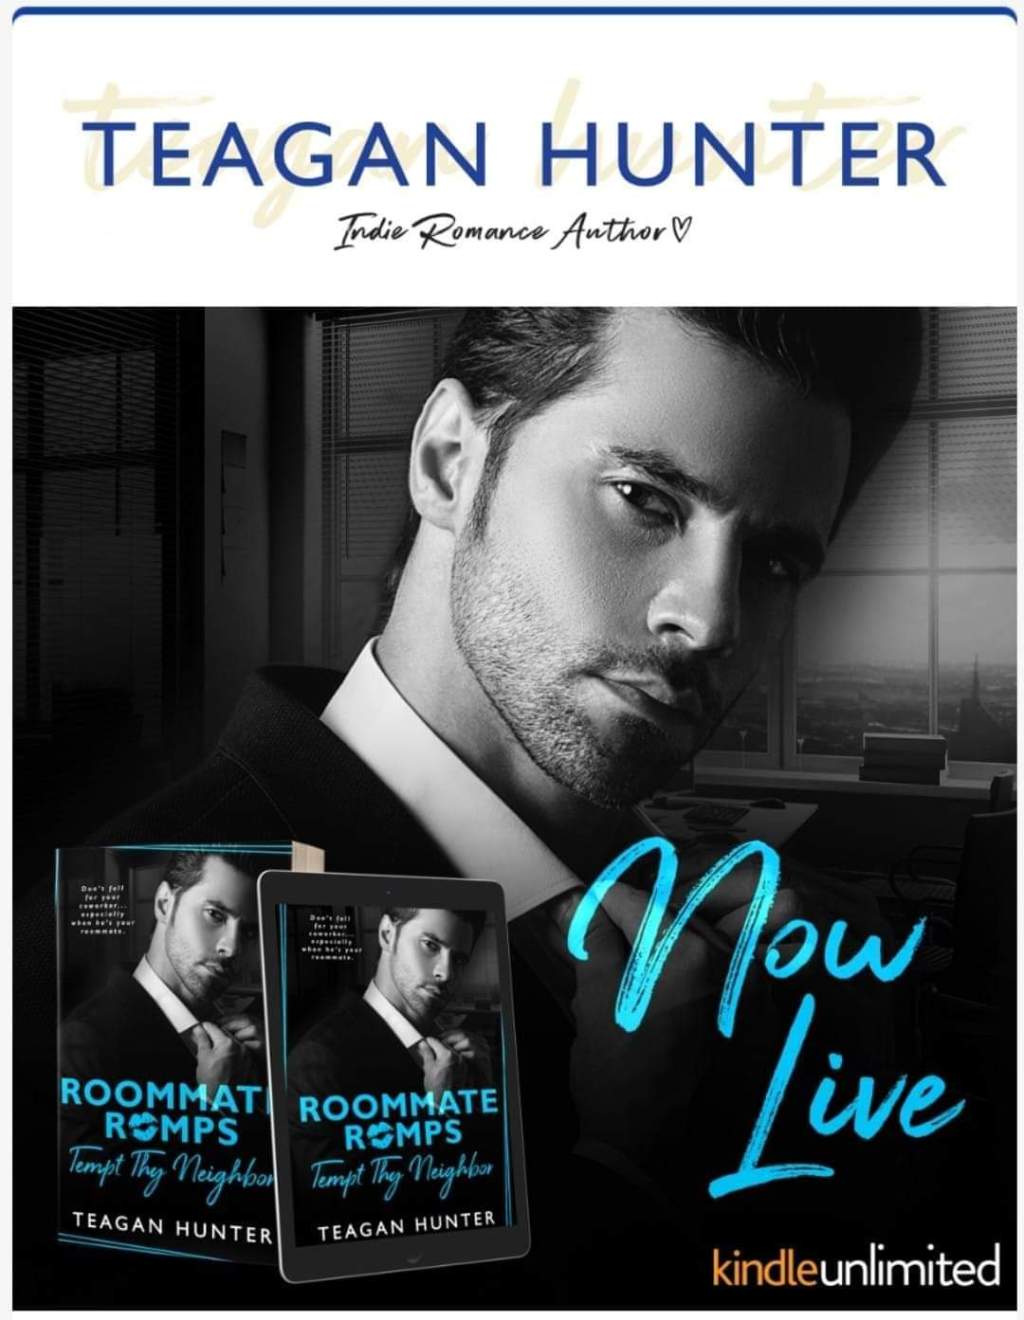 Tempt Thy Neighbor by Teagan Hunter (Book Review) 4.5 Stars!